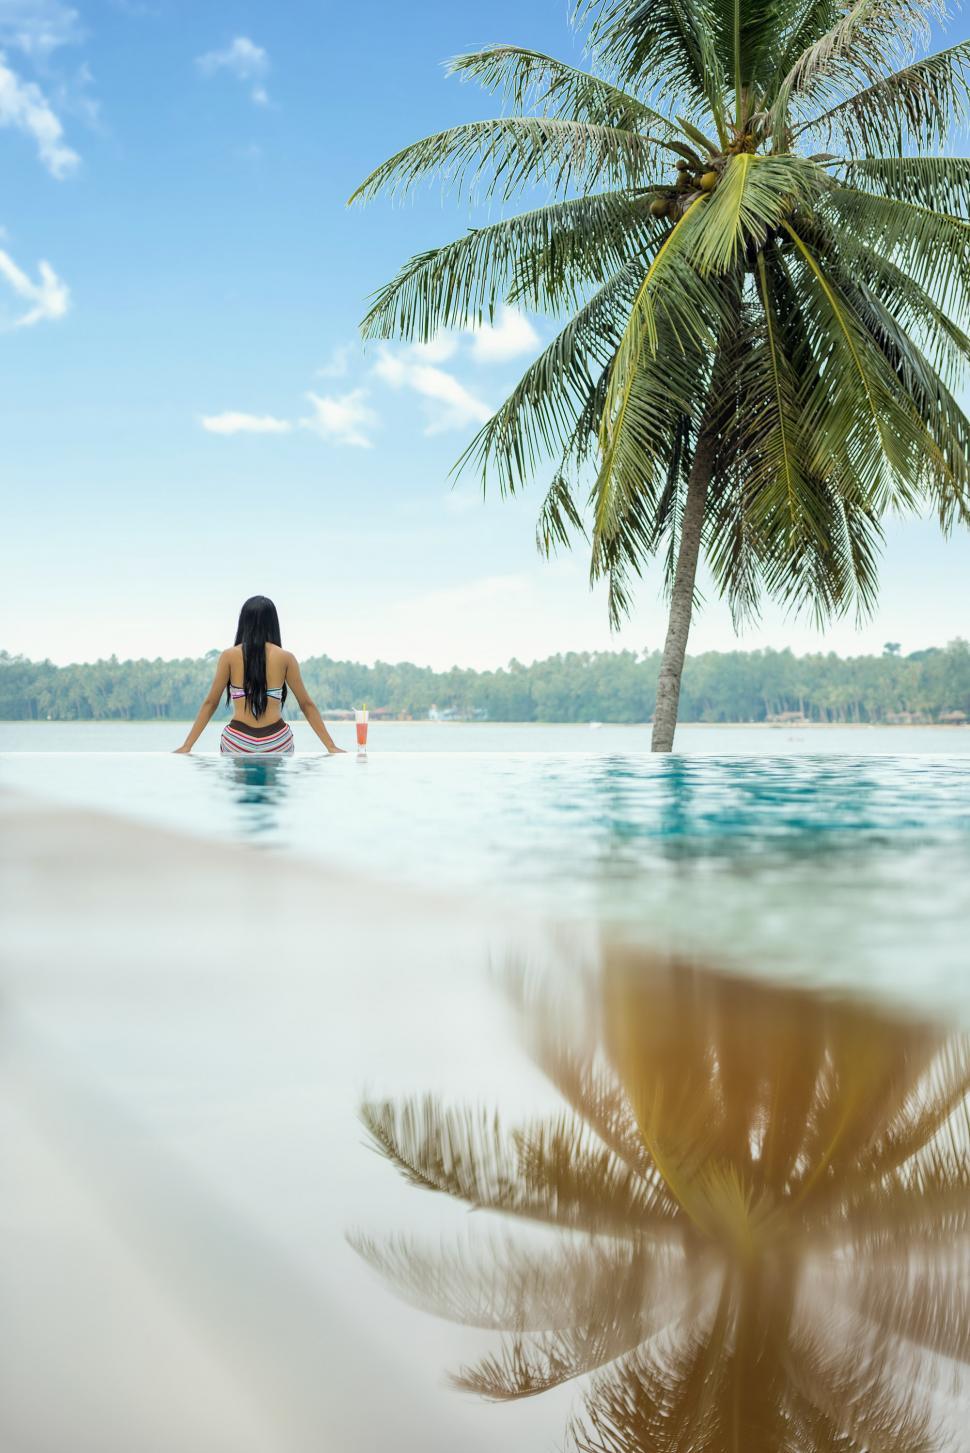 Free Image of Woman Sitting in Pool Next to Palm Tree 